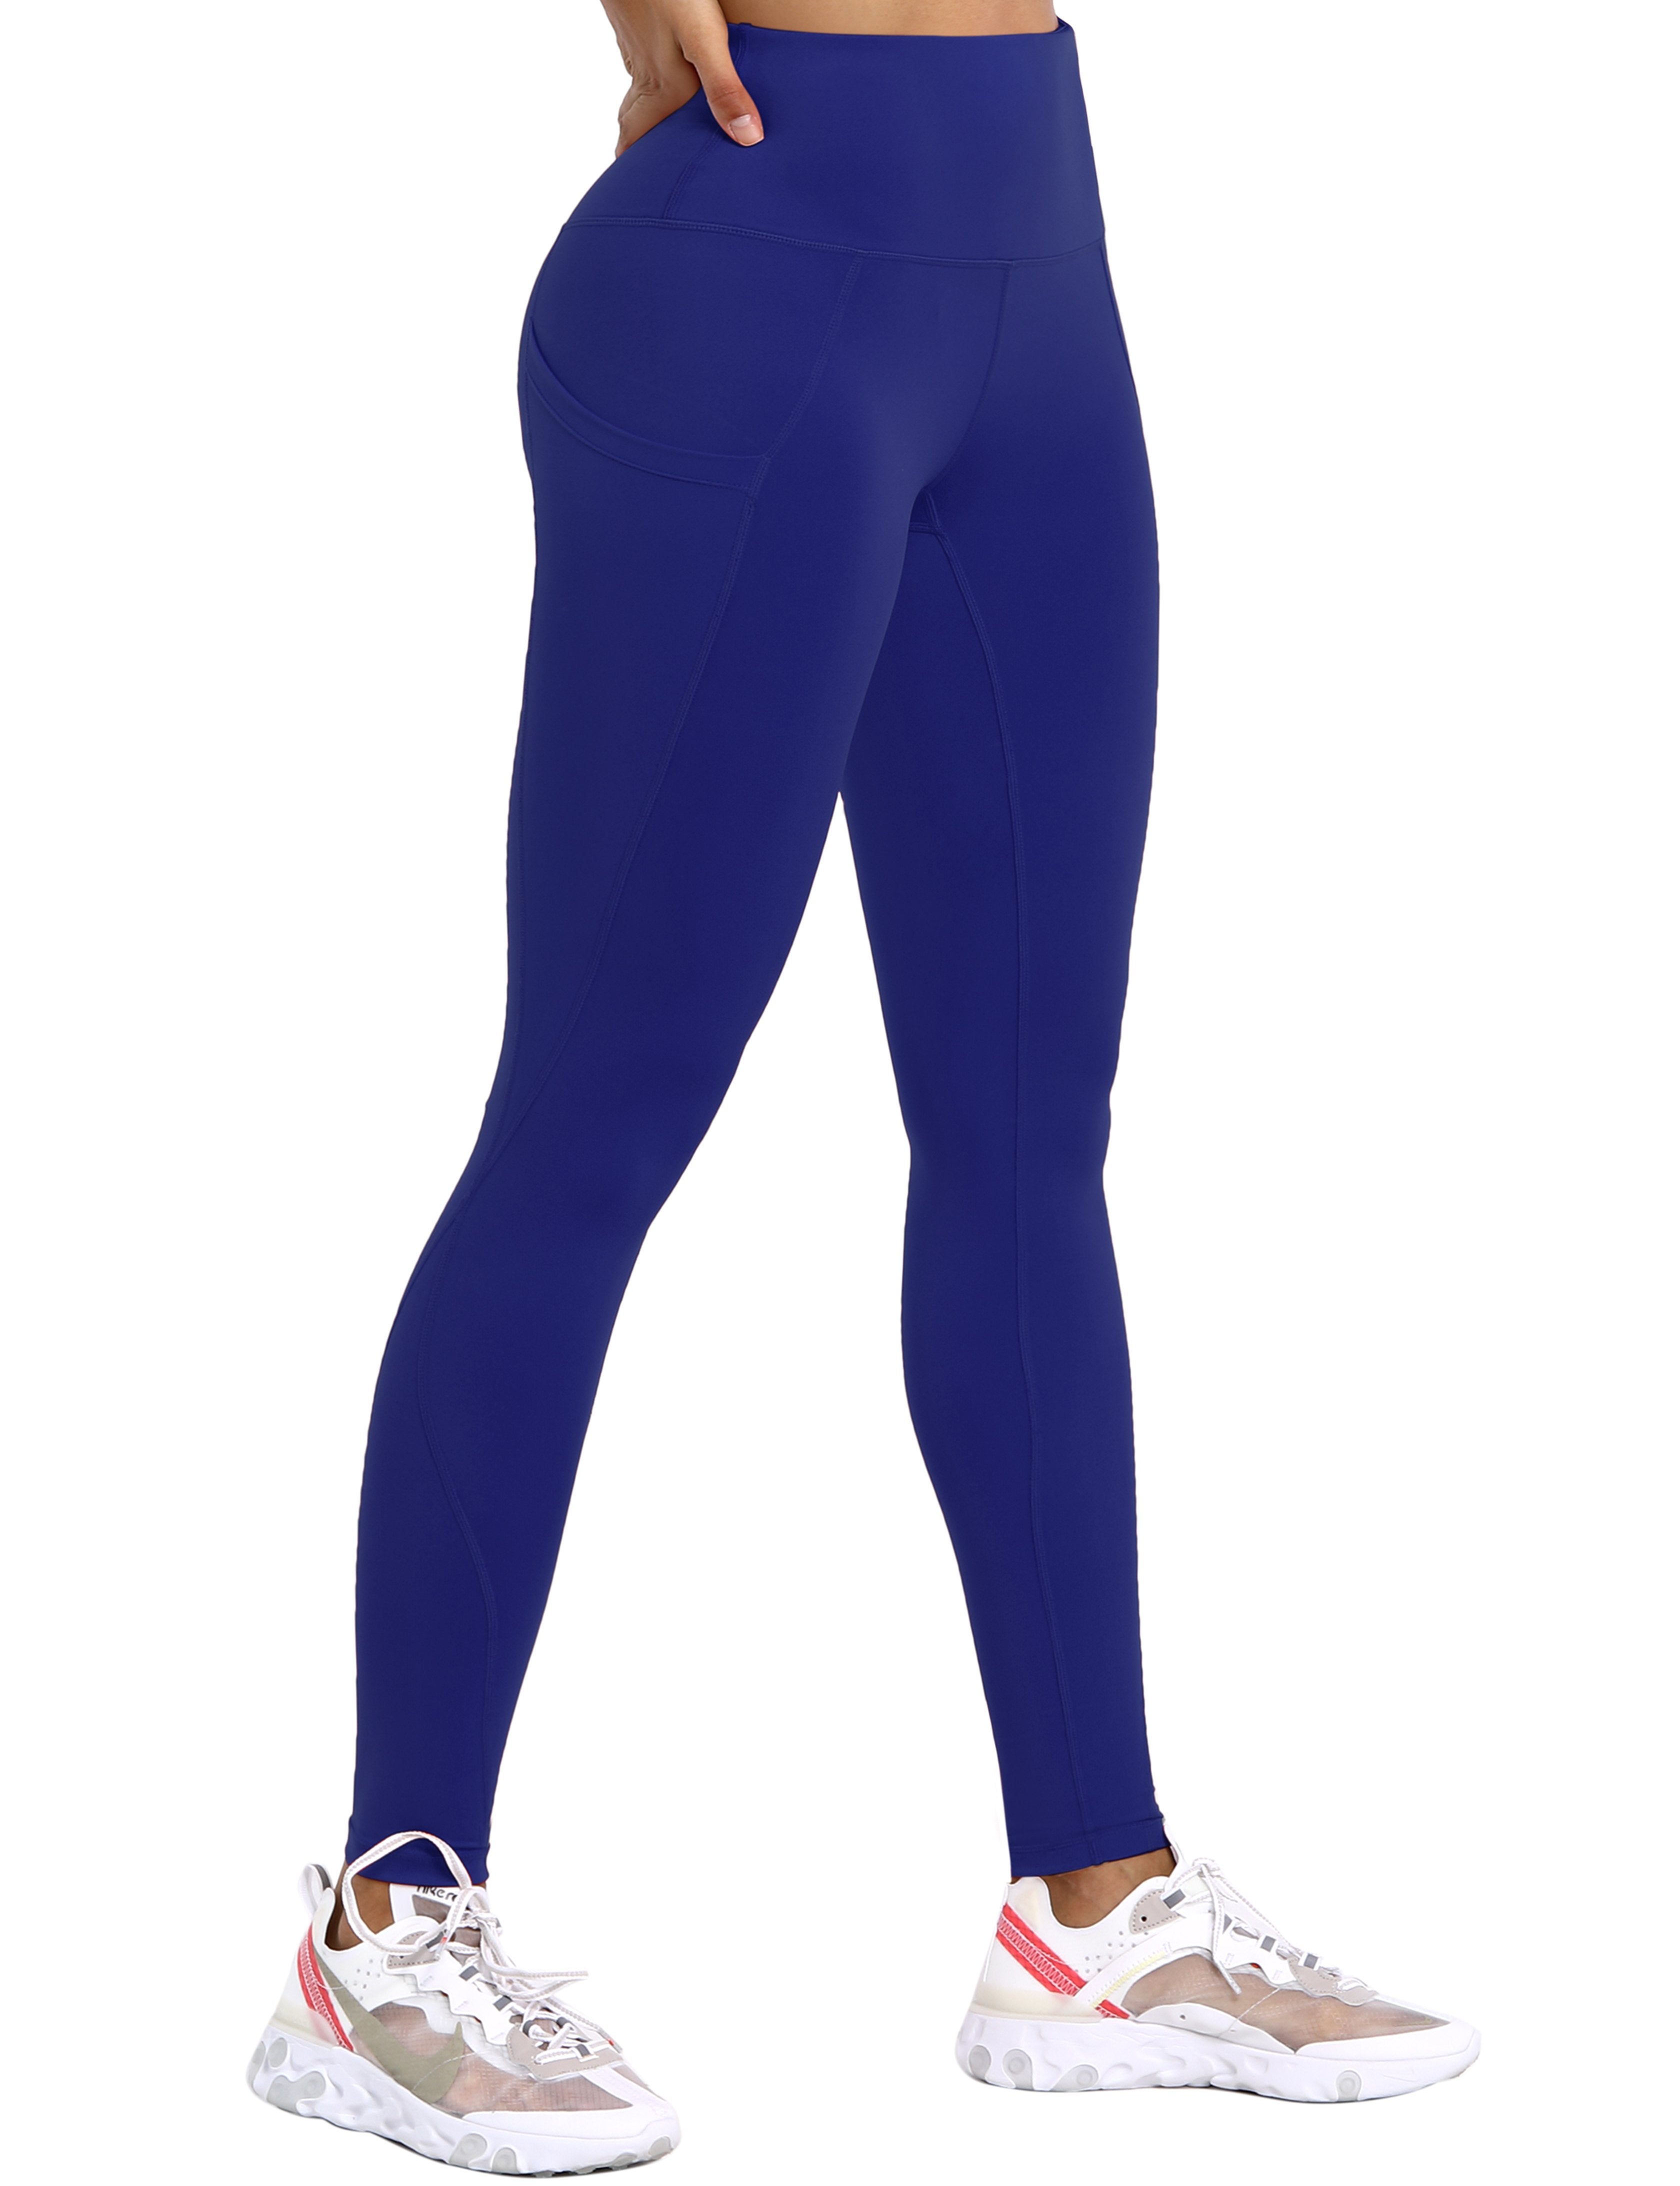 High Waist Side Pockets Tall Size Pants navy 75% Nylon, 25% Spandex Fabric doesn't attract lint easily 4-way stretch No see-through Moisture-wicking Tummy control Inner pocket